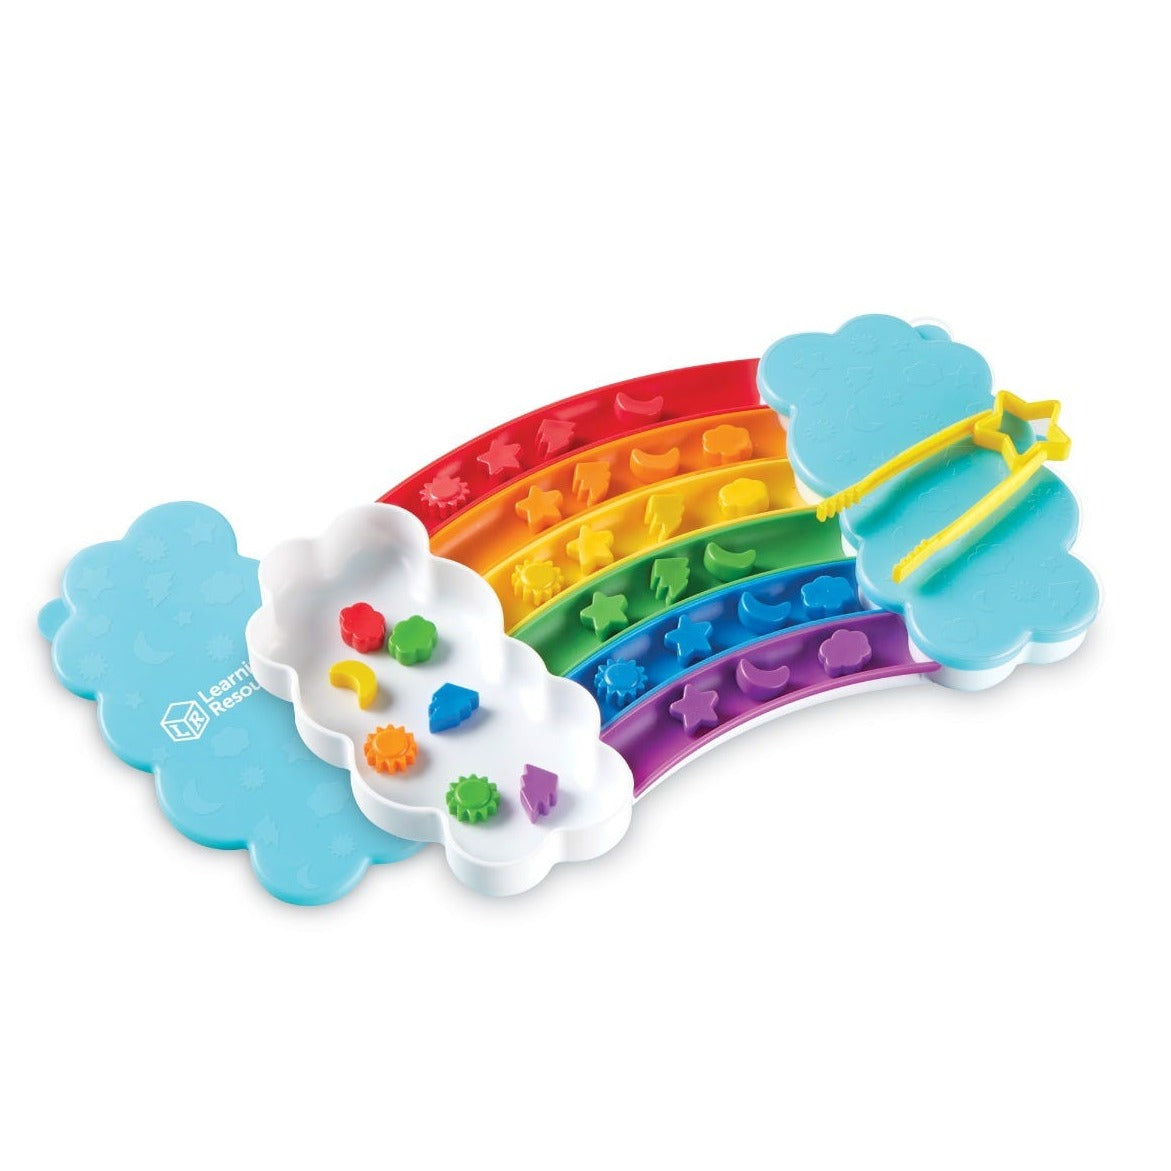 Rainbow Sorting Set, Kids learn a rainbow of sorting, patterning, and early addition skills with the vibrant Rainbow Sorting Tray preschool learning toy. As children use the fine motor tongs to pick up the 30 counters in 6 colours (red, orange, yellow, green, blue and purple) in 5 shapes (sun, star, moon, lightning bolt and cloud), they build fine motor skills, colour and shape recognition, and sorting and patterning skills. The assembled tray is complete with 2 cloud-shaped storage areas with lids, and all